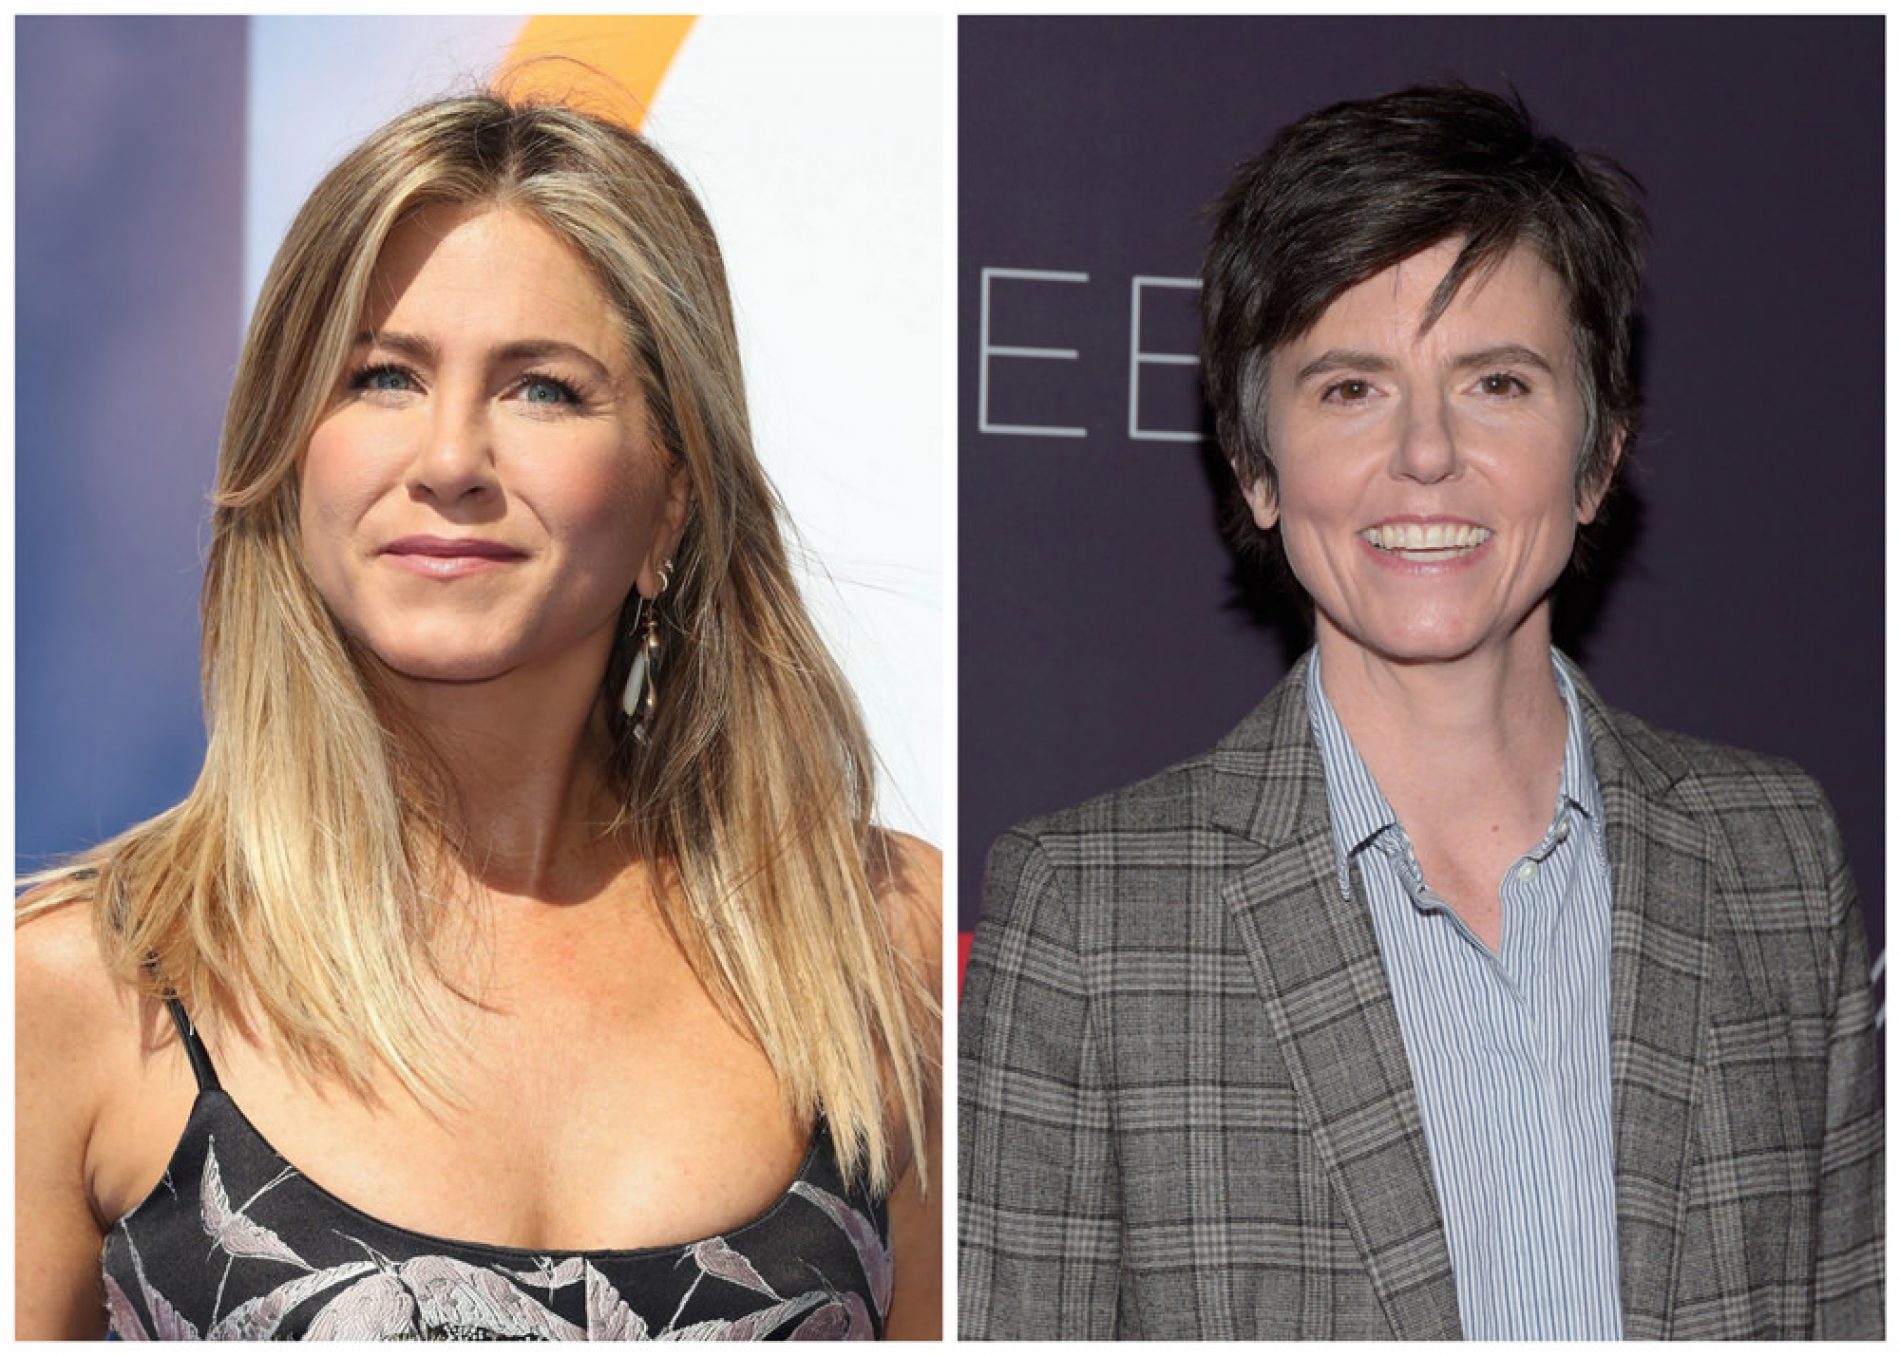 Jennifer Aniston Will Play the President of the United States and Tig Notaro Will Play Her Wife in New Movie